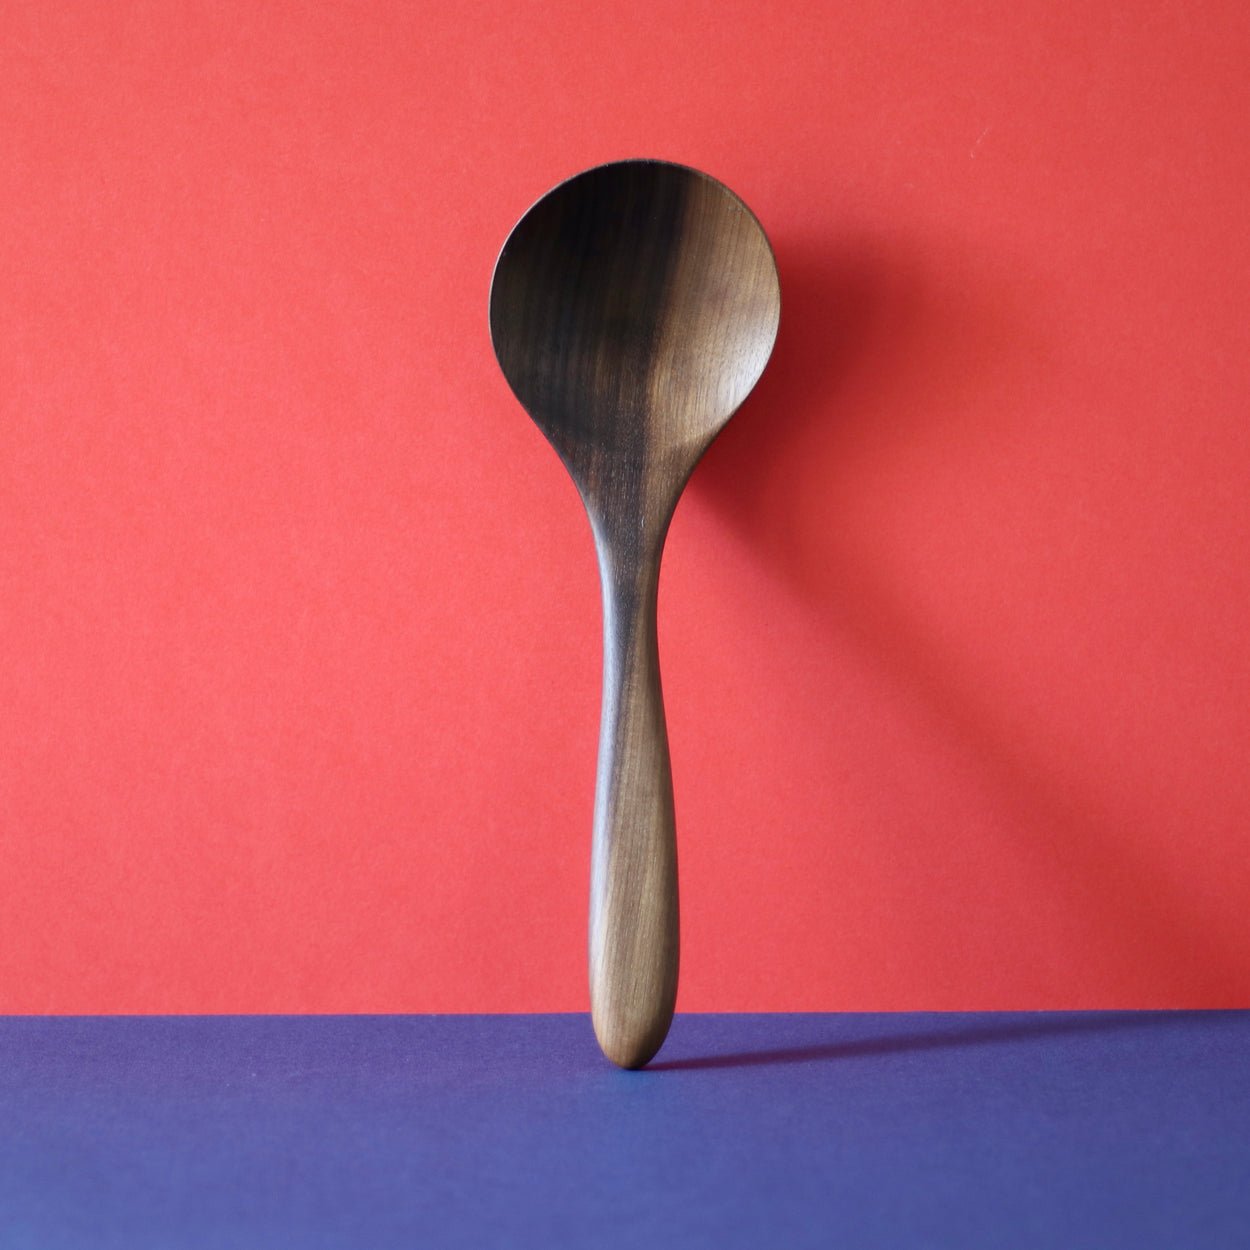 Upright Handmade Walnut Wood Soup Ladle with red and blue background